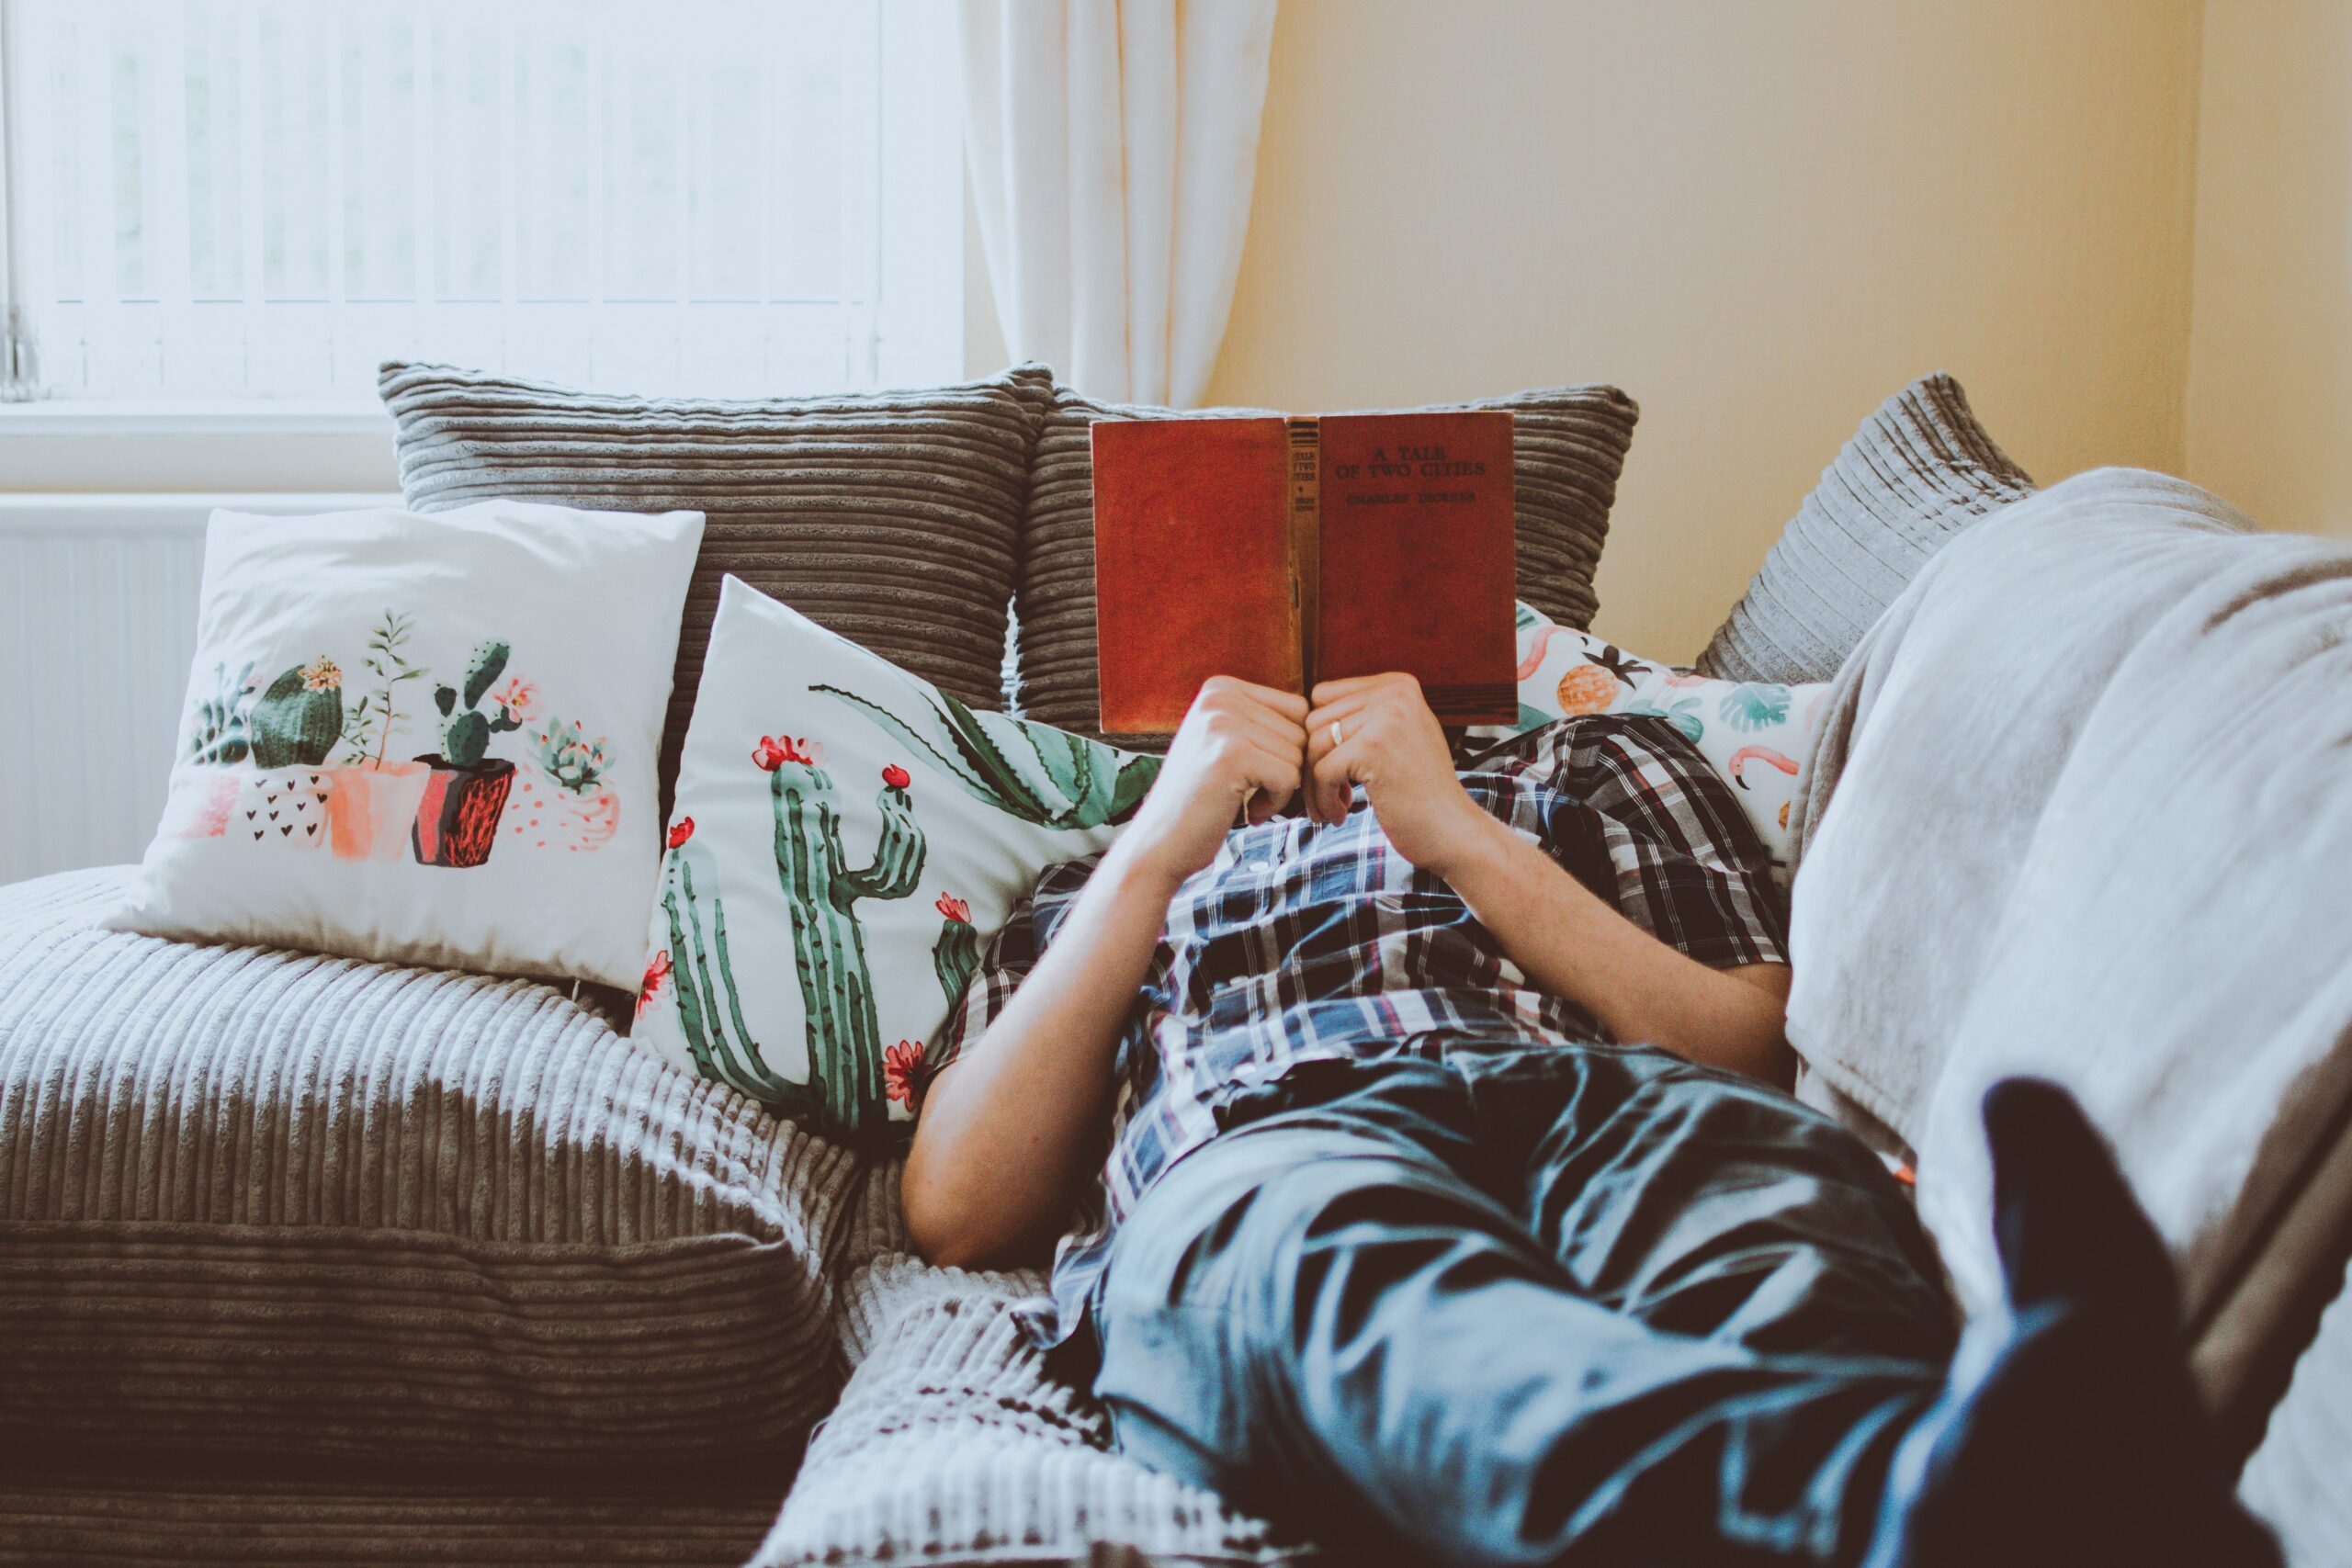 a person laying on a sofa reading a book. The book is covering their face. The cushions on the sofa have pictures of cacti on them